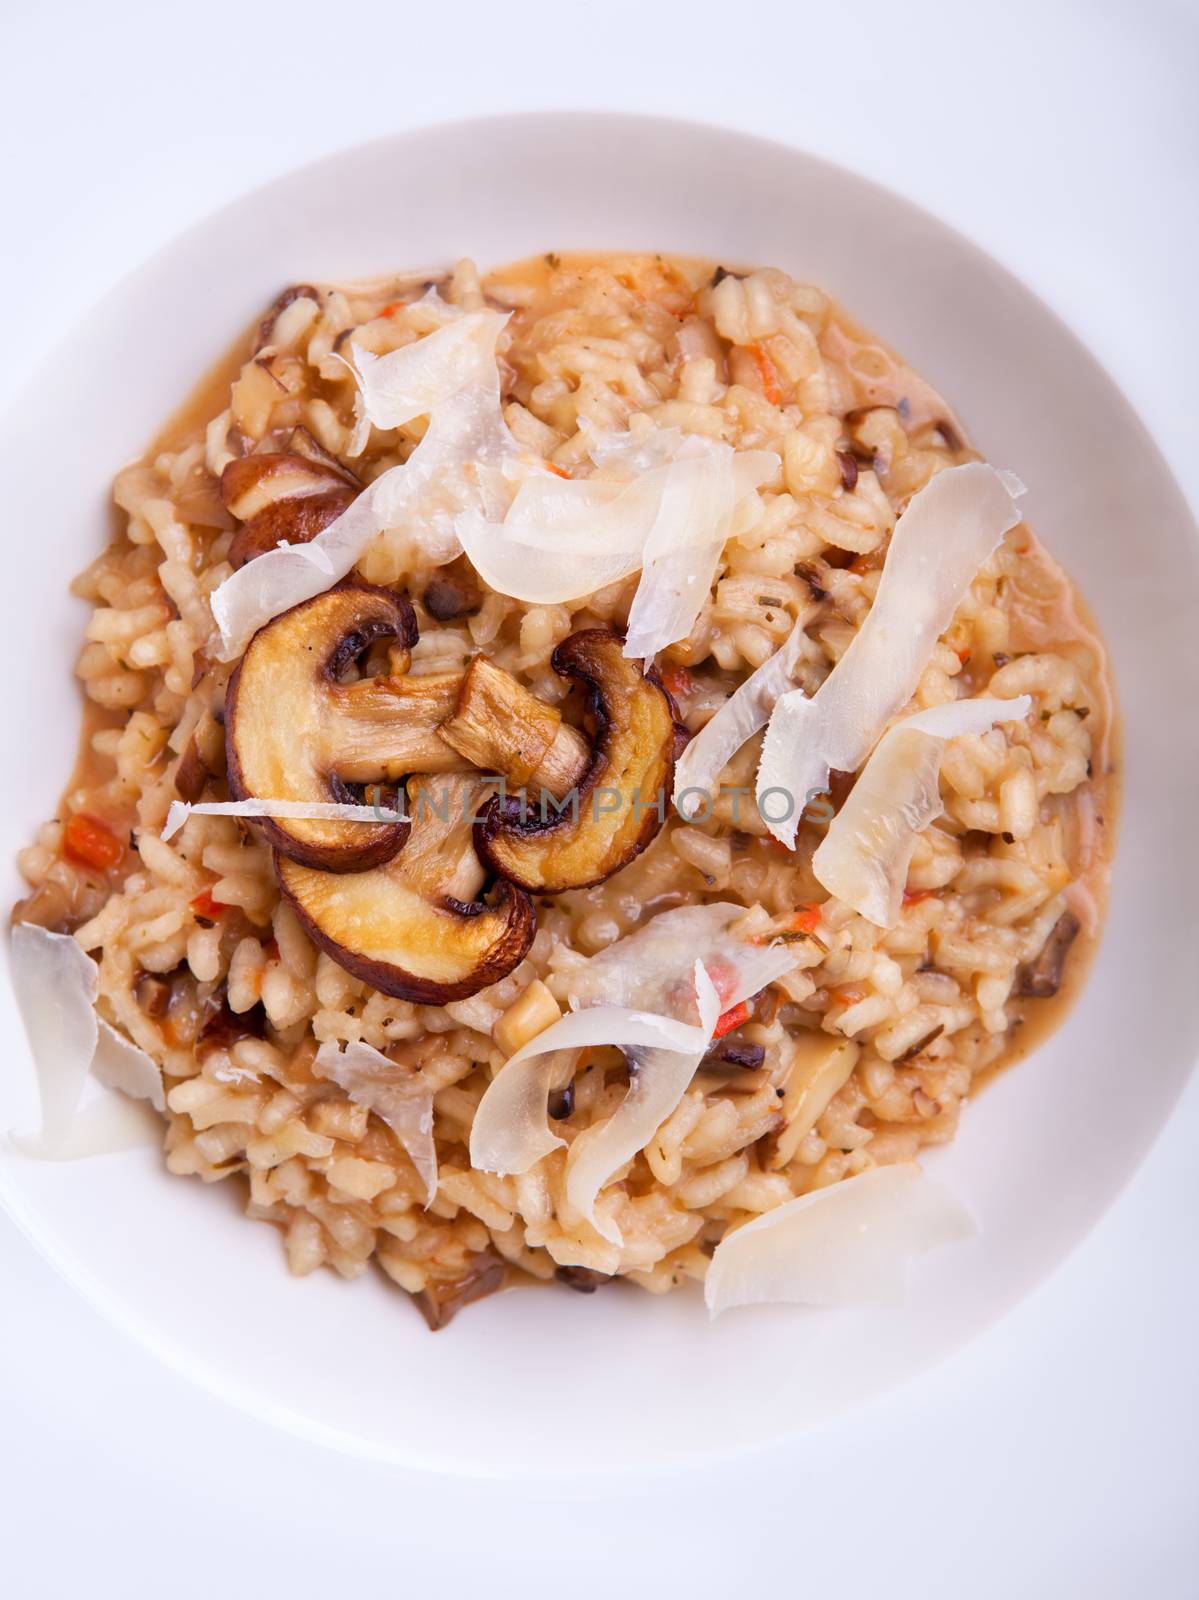 Mushroom risotto Italian cuisine placed on a white background. by supercat67